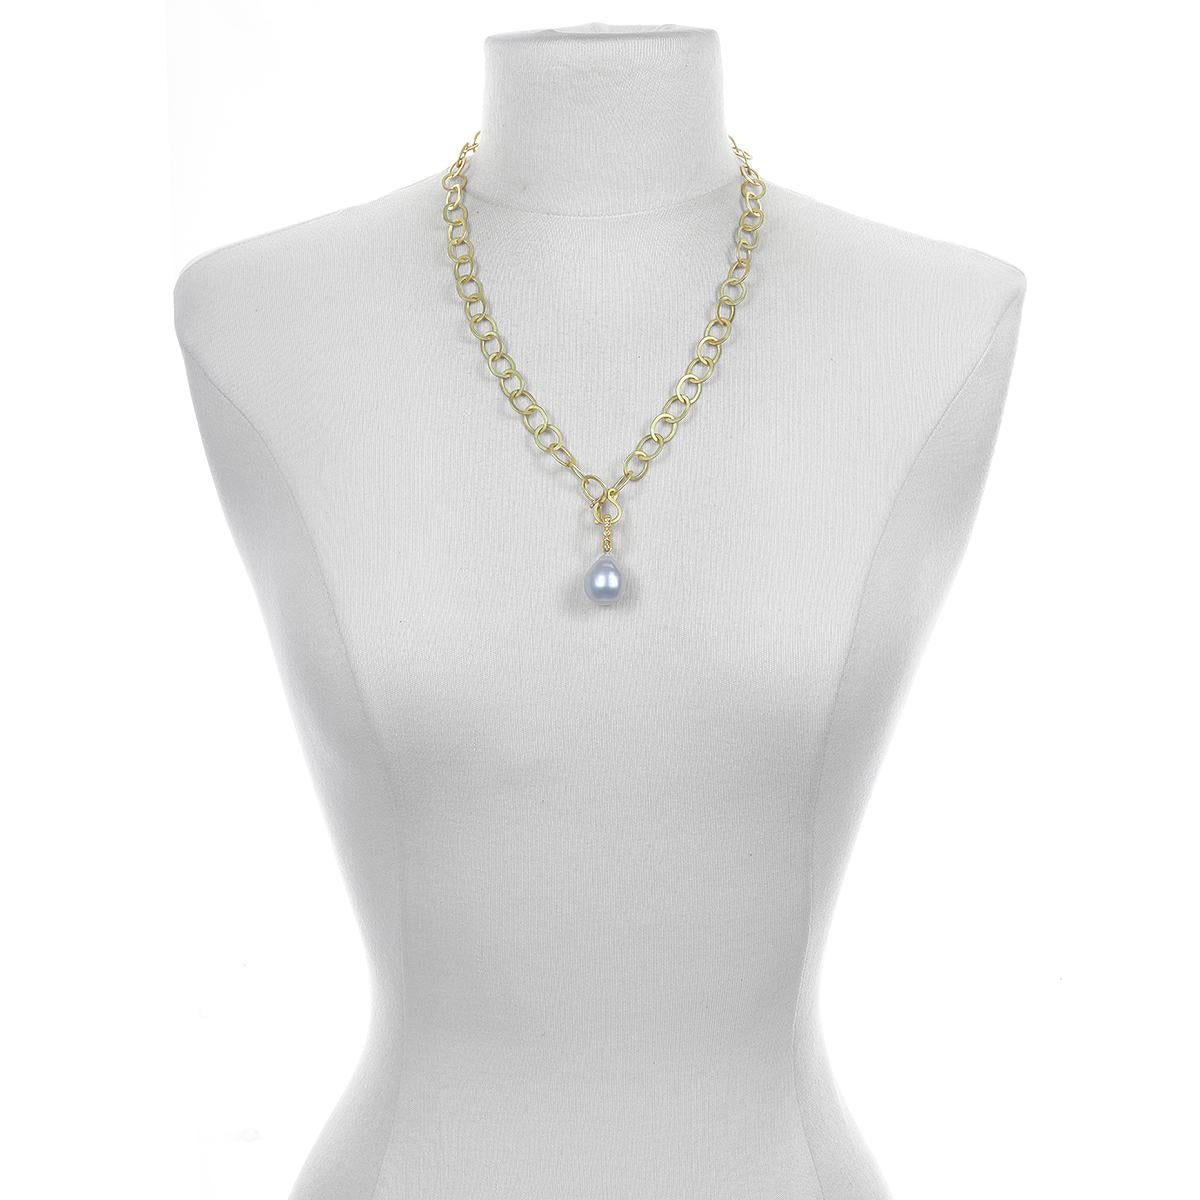 Faye Kim's 18 Karat Gold and Diamond White South Sea Baroque Pendant is fresh, clean, modern and timeless, and the diamond granulation bead bail adds just the right amount of sparkle. The pearl pendant in some photos is shown on an 18 Karat Gold